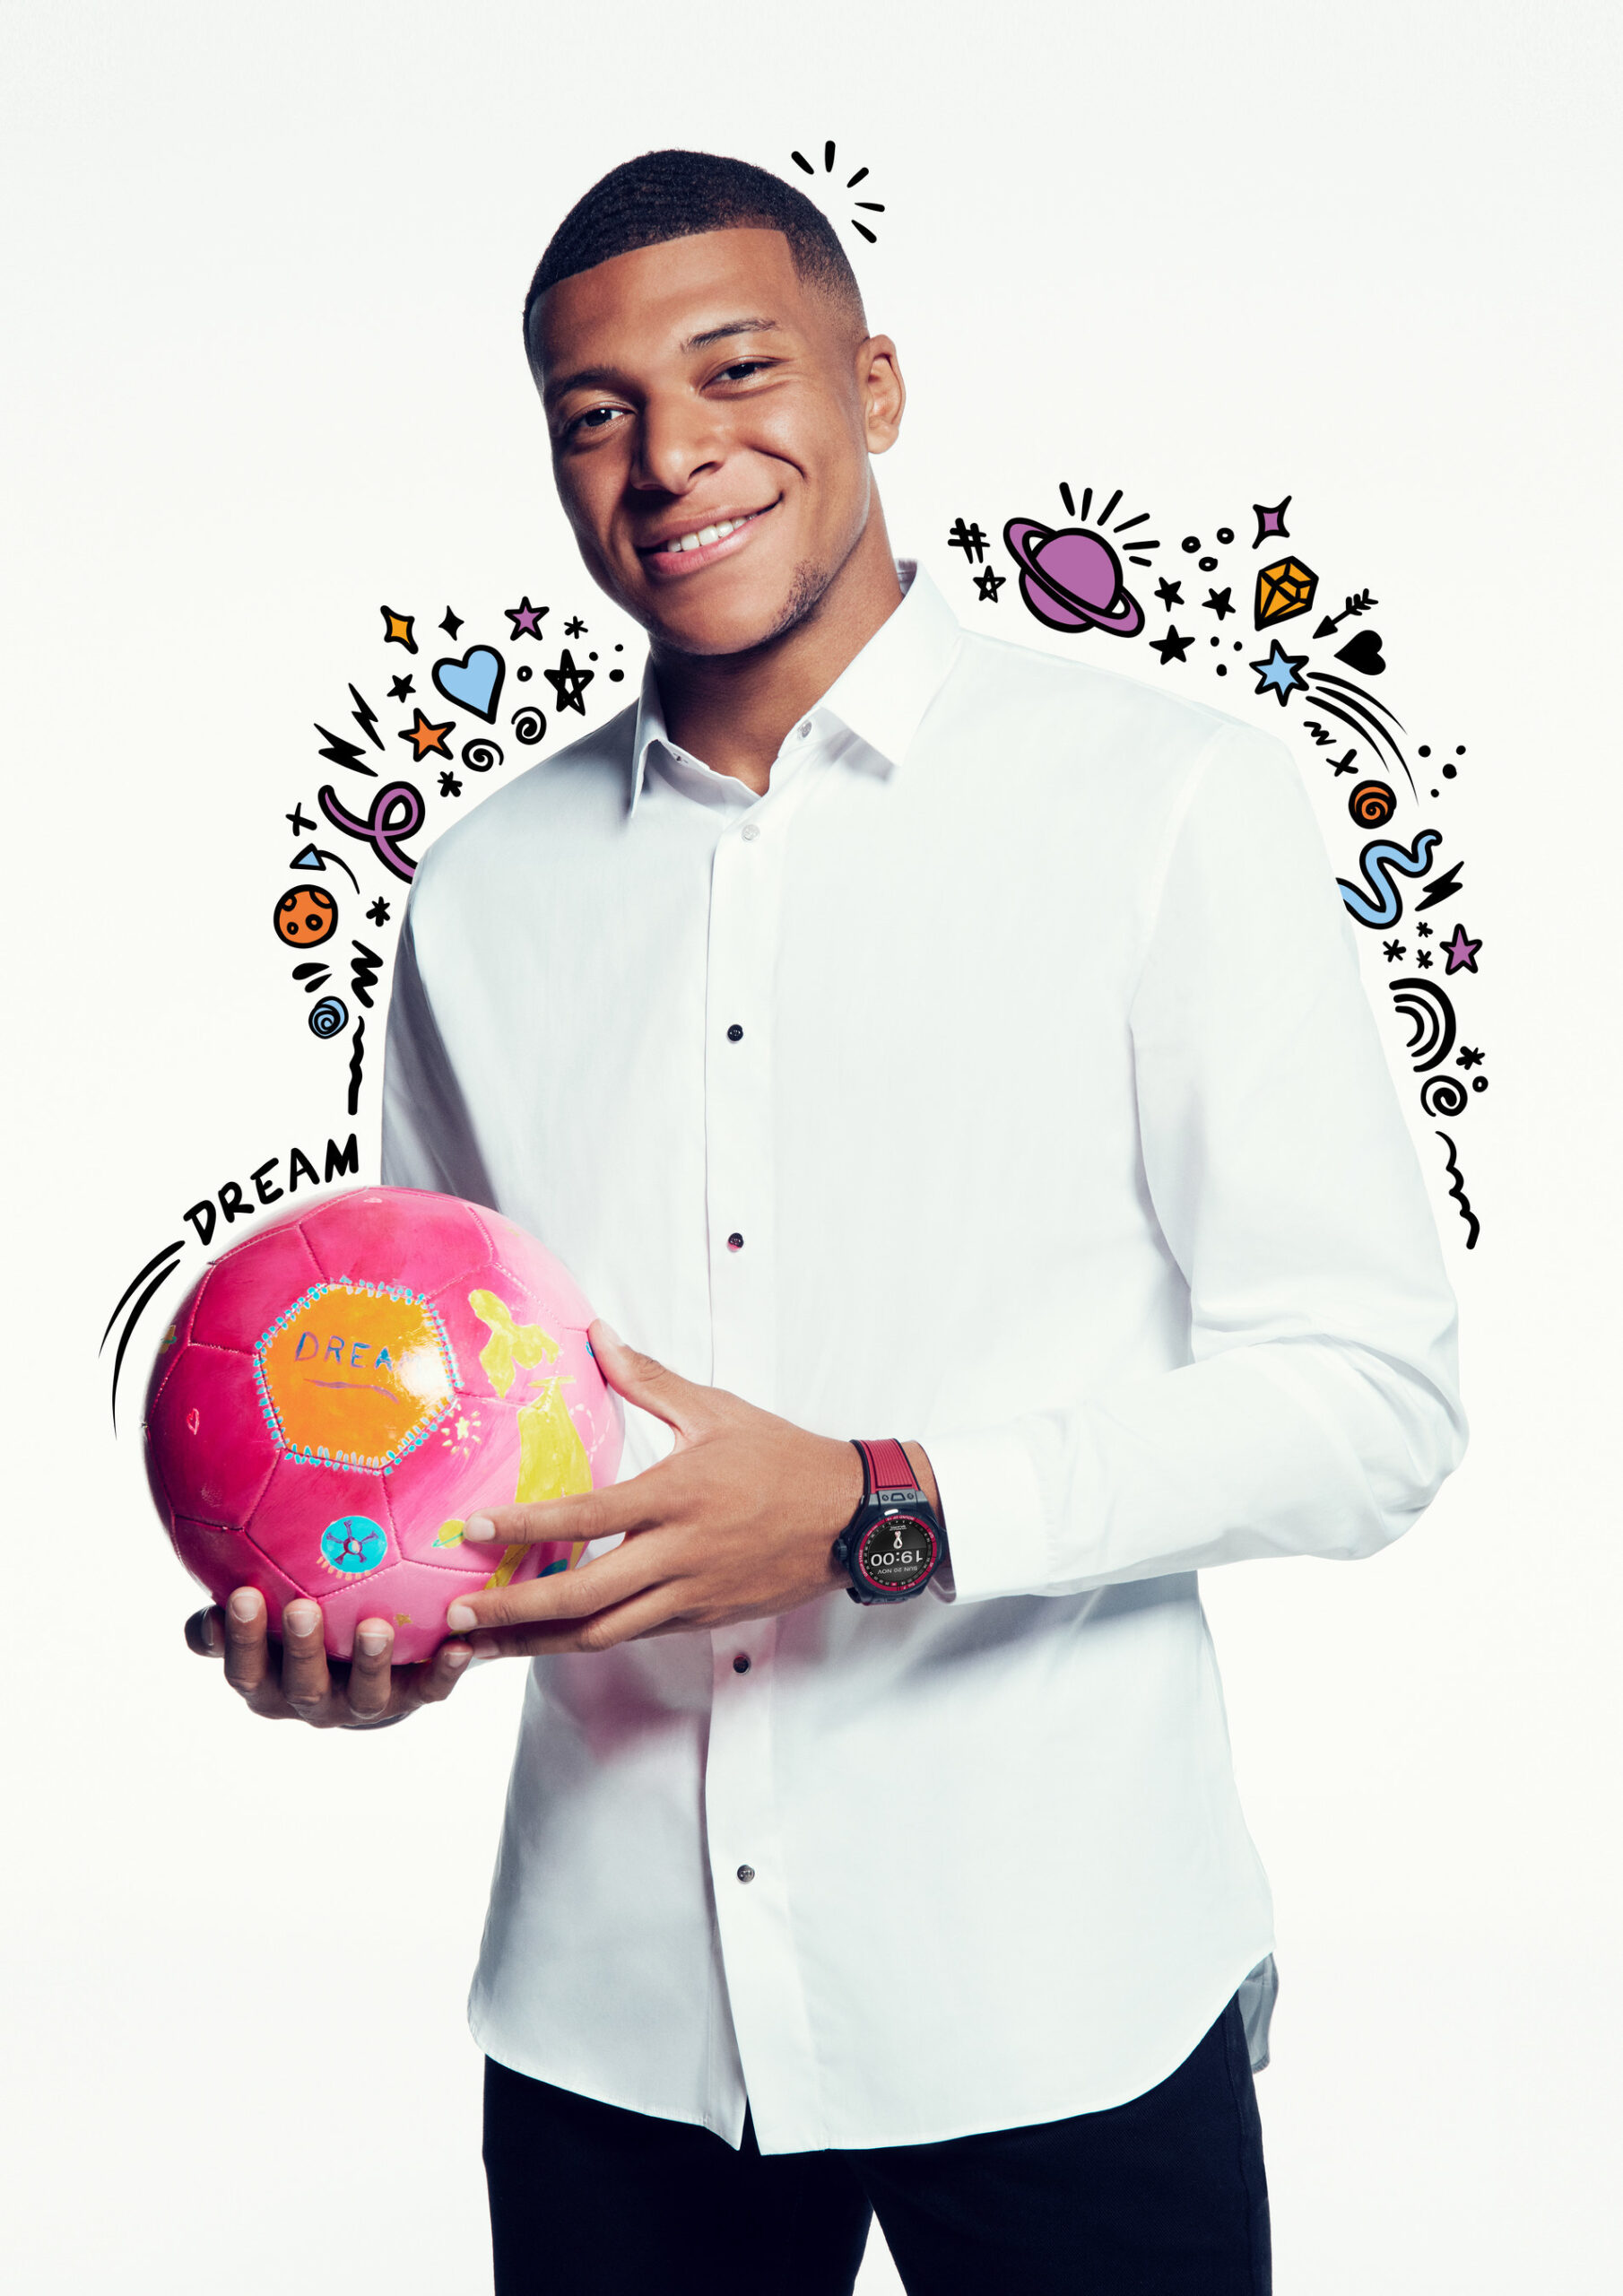 Kylian Mbappé wearing the Big Bang e FIFA World Cup Qatar 2022™ with his dream football